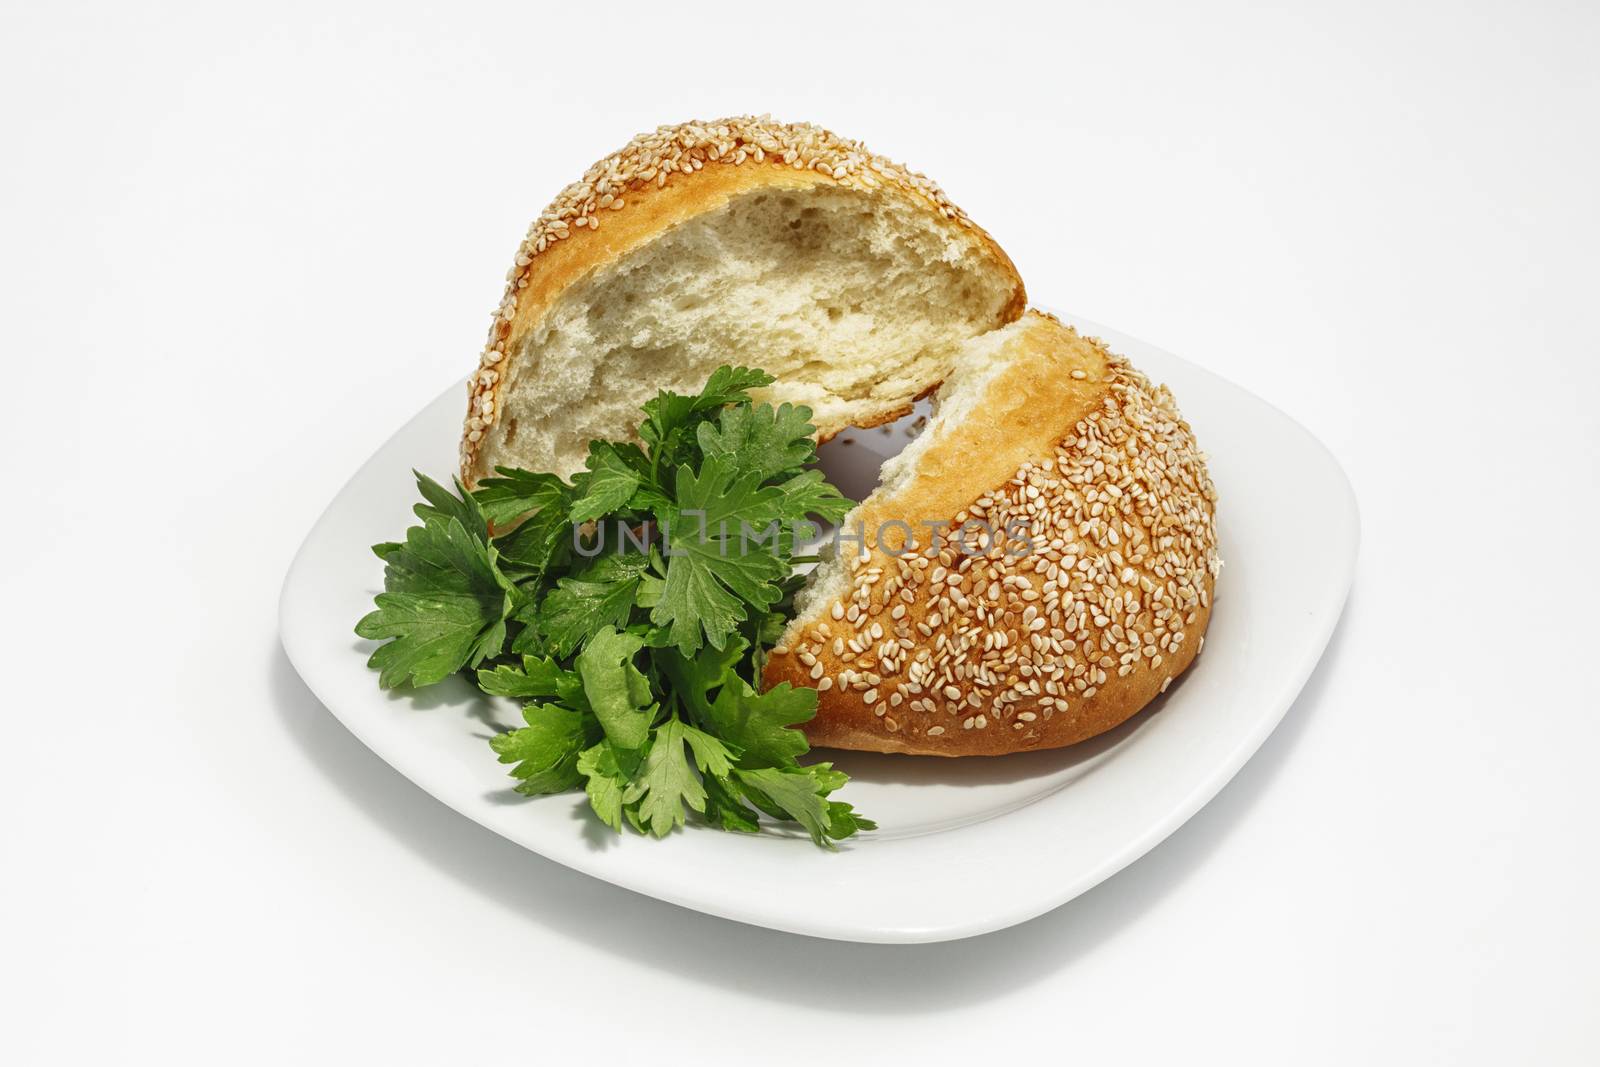 Bun with sesame seeds broken in half on a plate with greens. Shot on a white plastic closeup